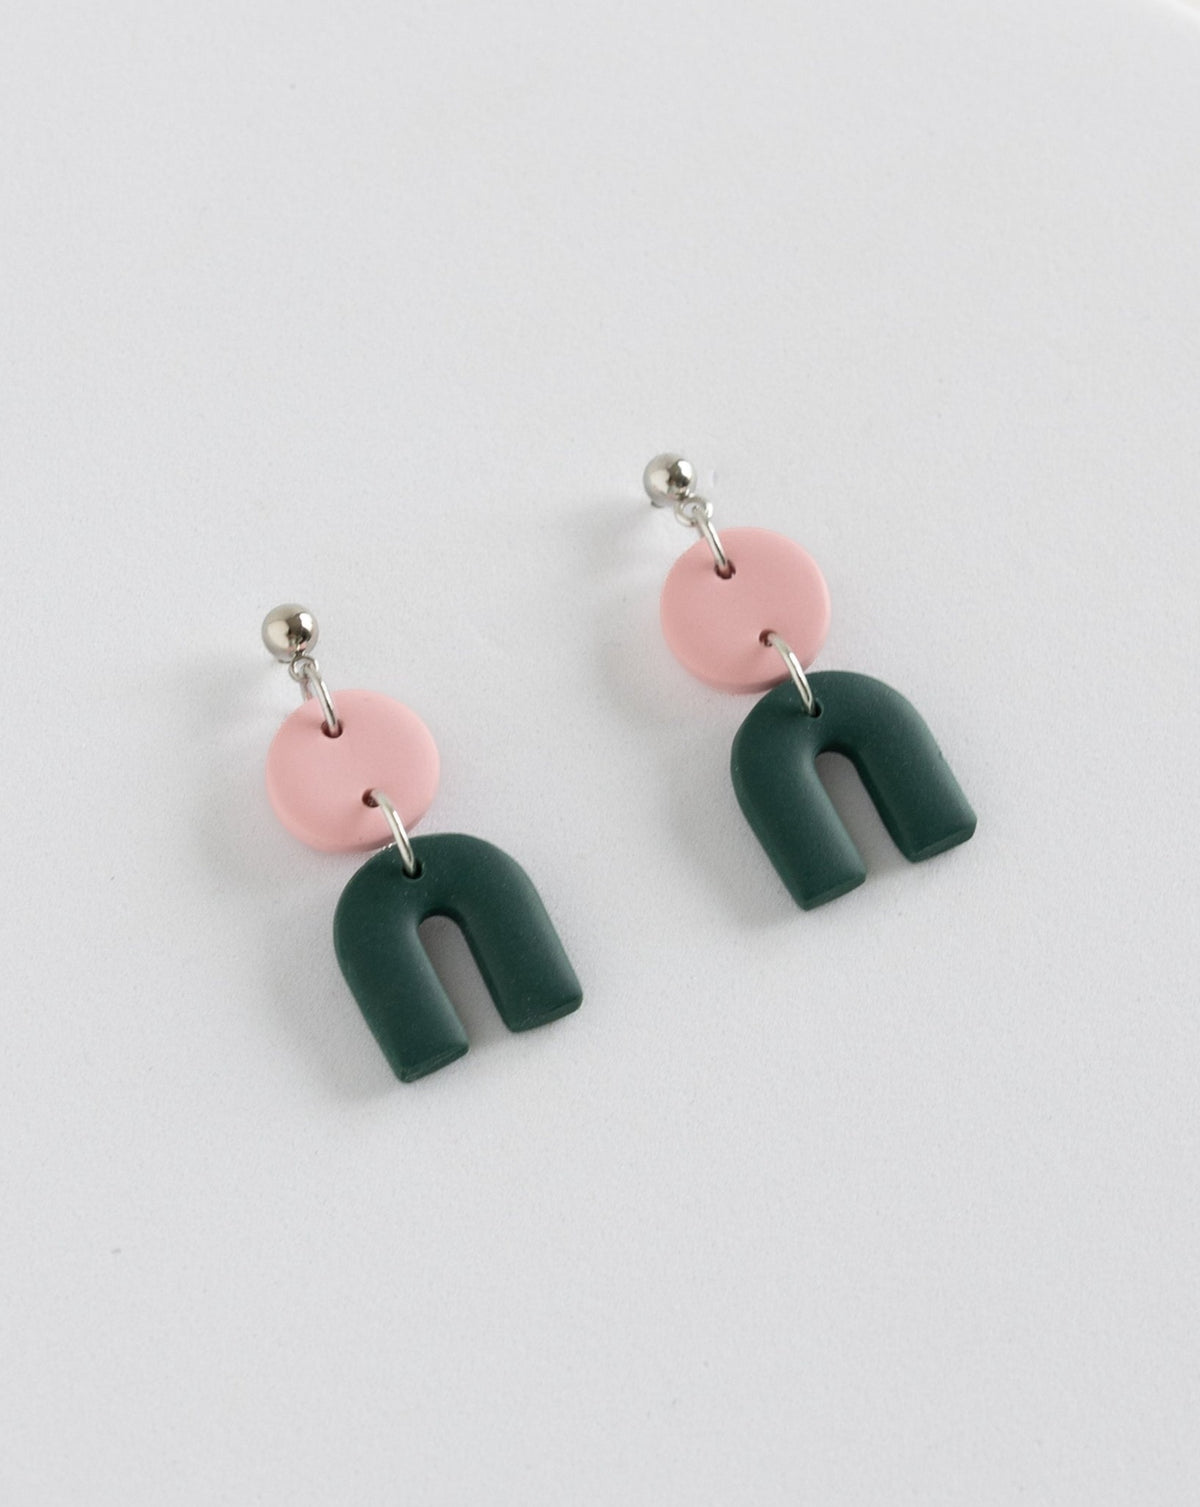 Tiny Arch earrings in two part of pink and pine clay parts with silver Ball studs, angled view.